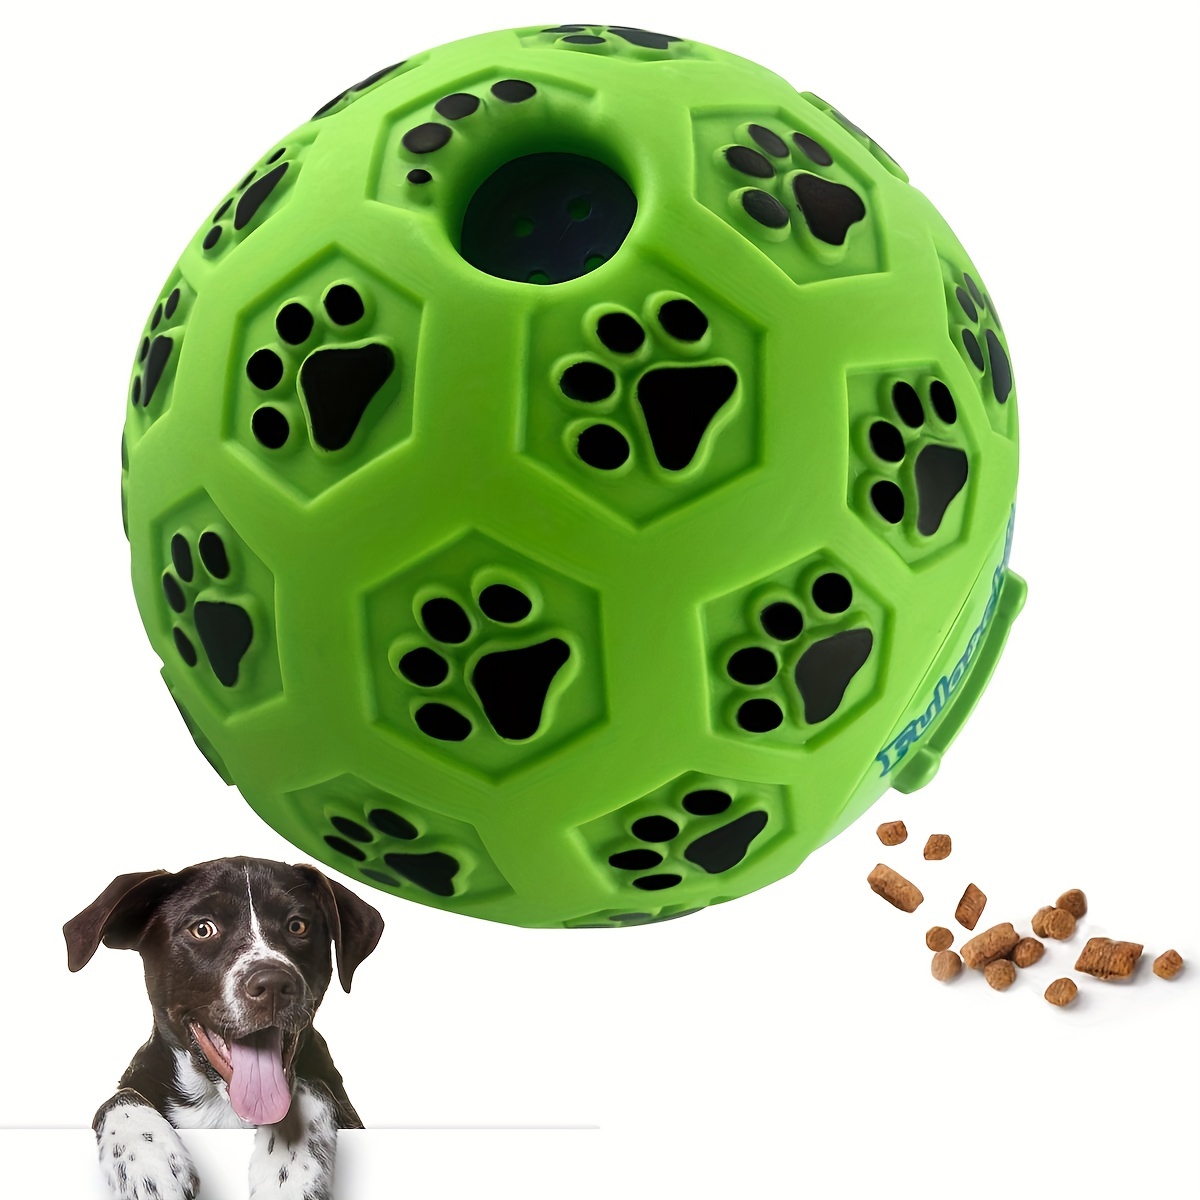 Giggle Ball, Interactive Dog Toys, Fun Giggle Sounds When Rolled or Shaken,  Puppy Small Medium Dogs Favorite Pets Toys Gift.(Large, Green)